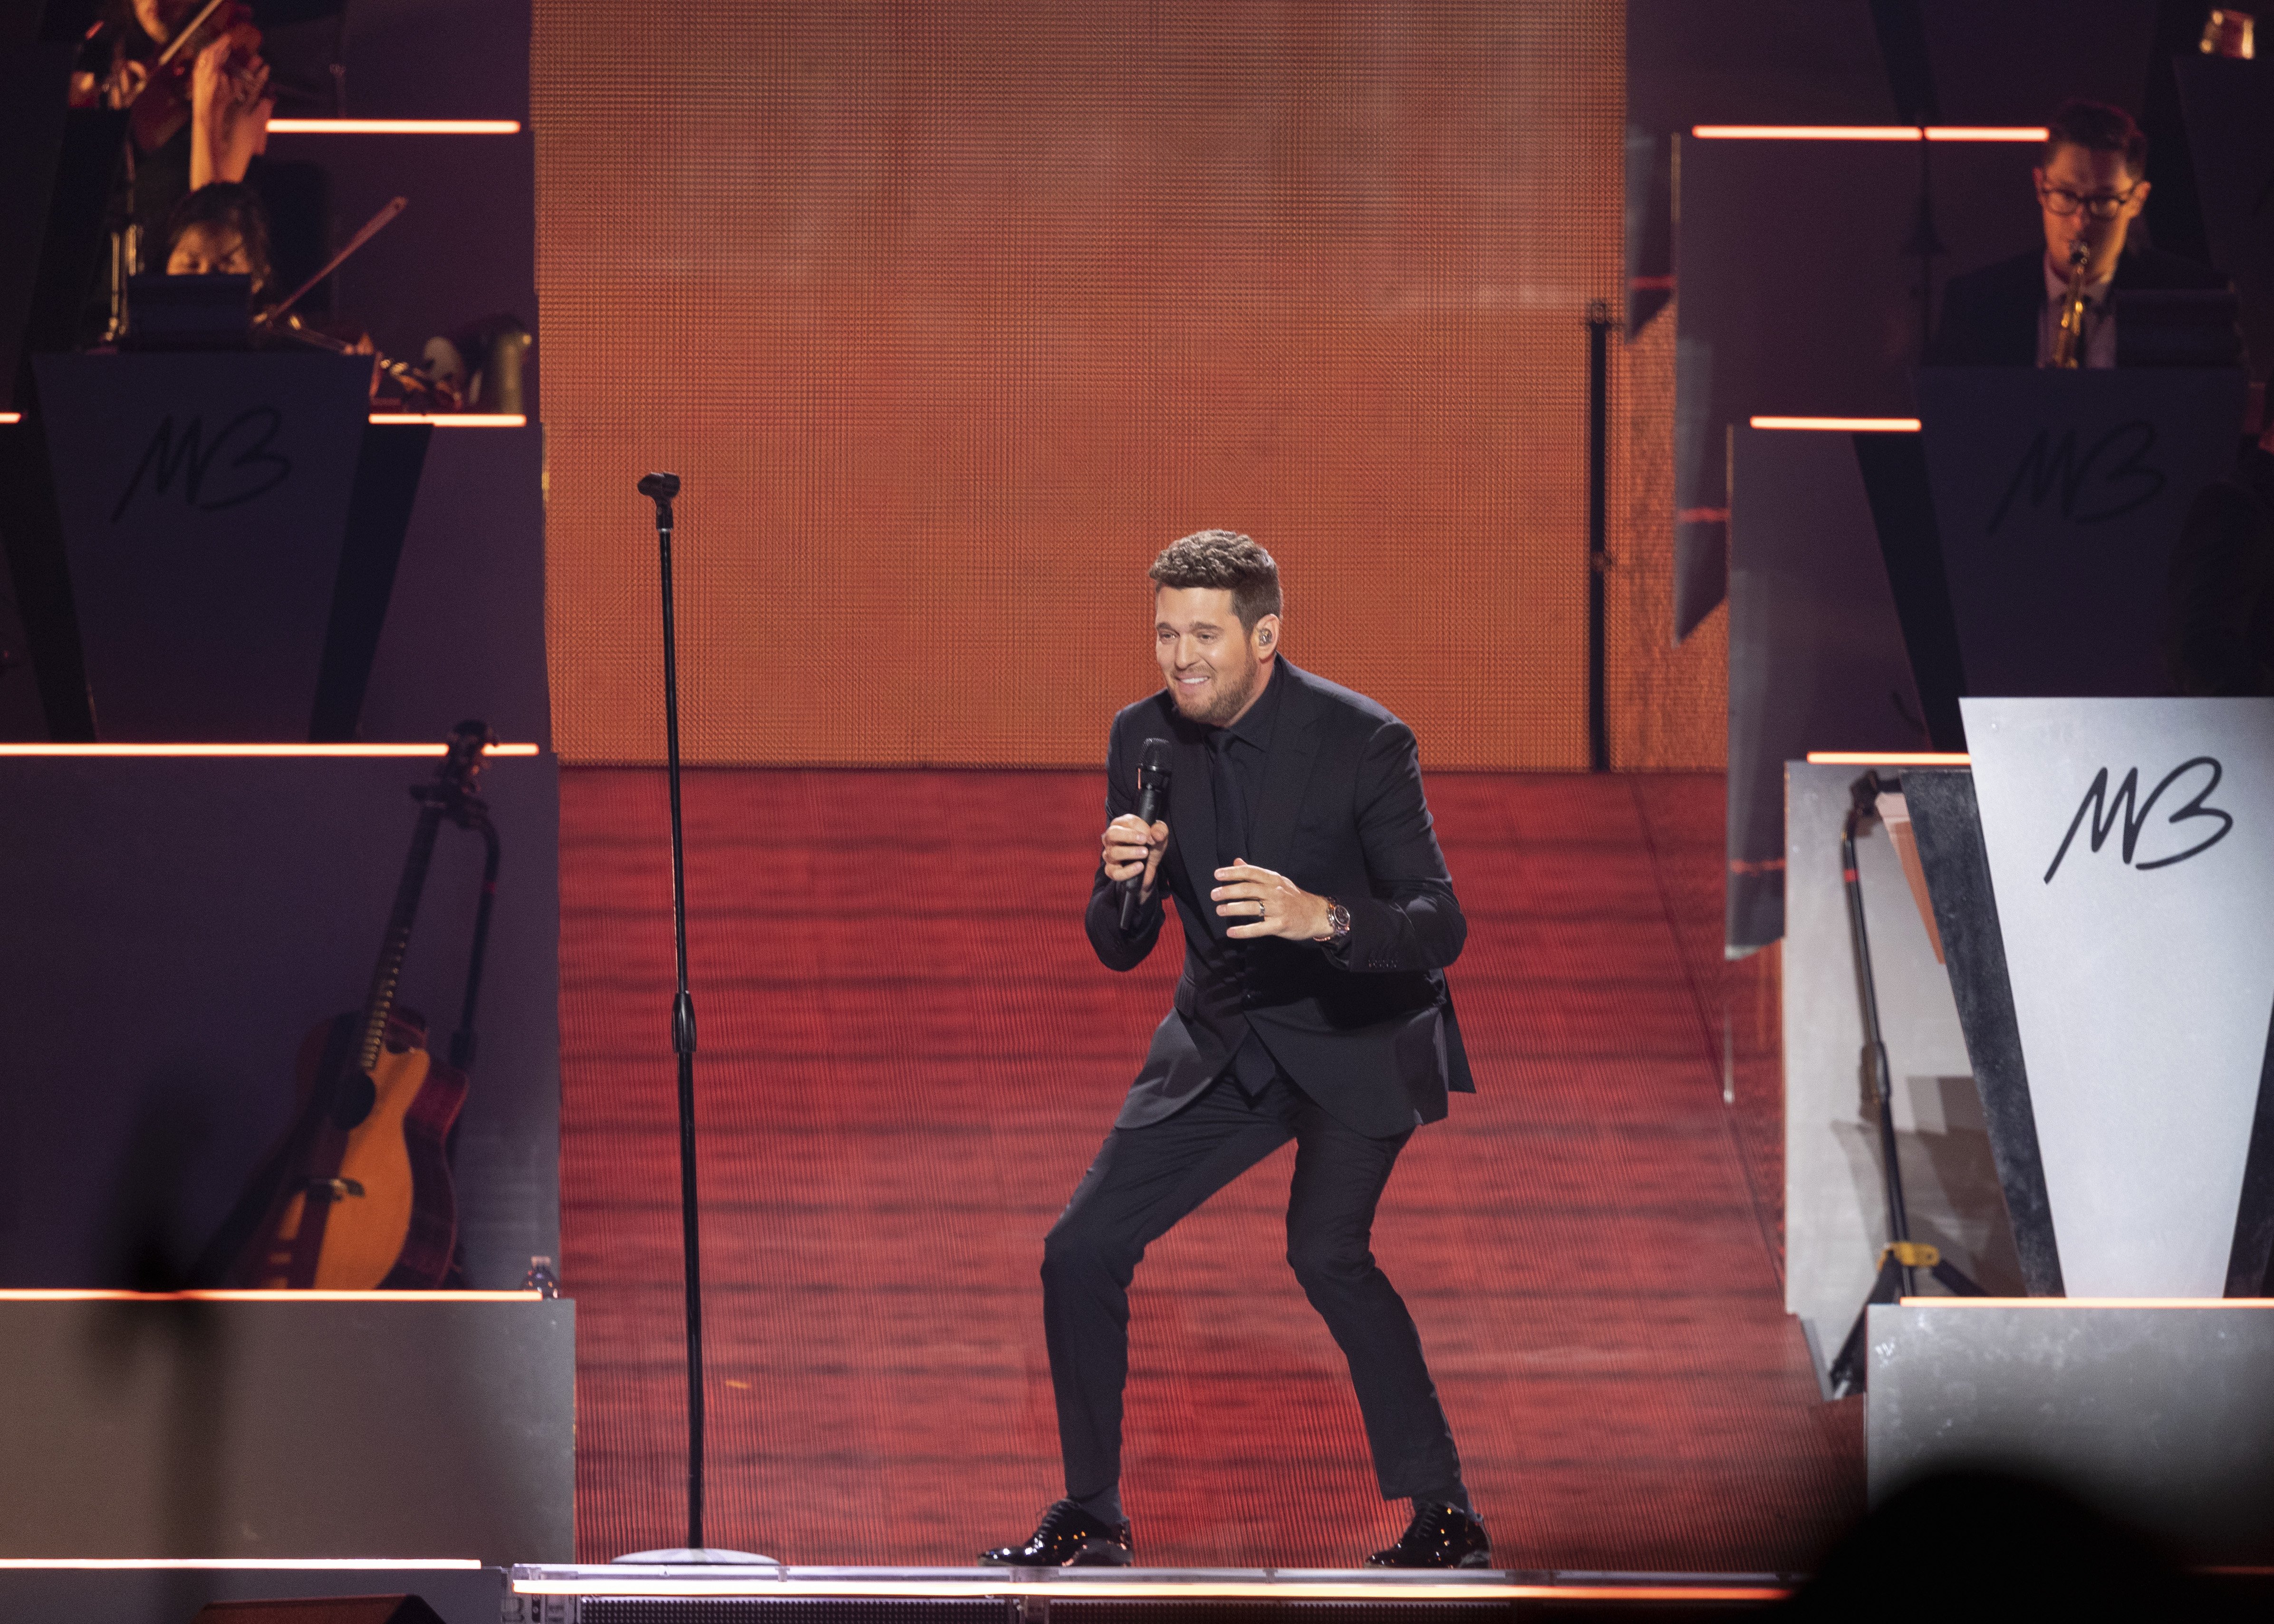 Michael Bublé am 1. Oktober 2022 in Vancouver, British Columbia, Kanada | Quelle: Getty Images